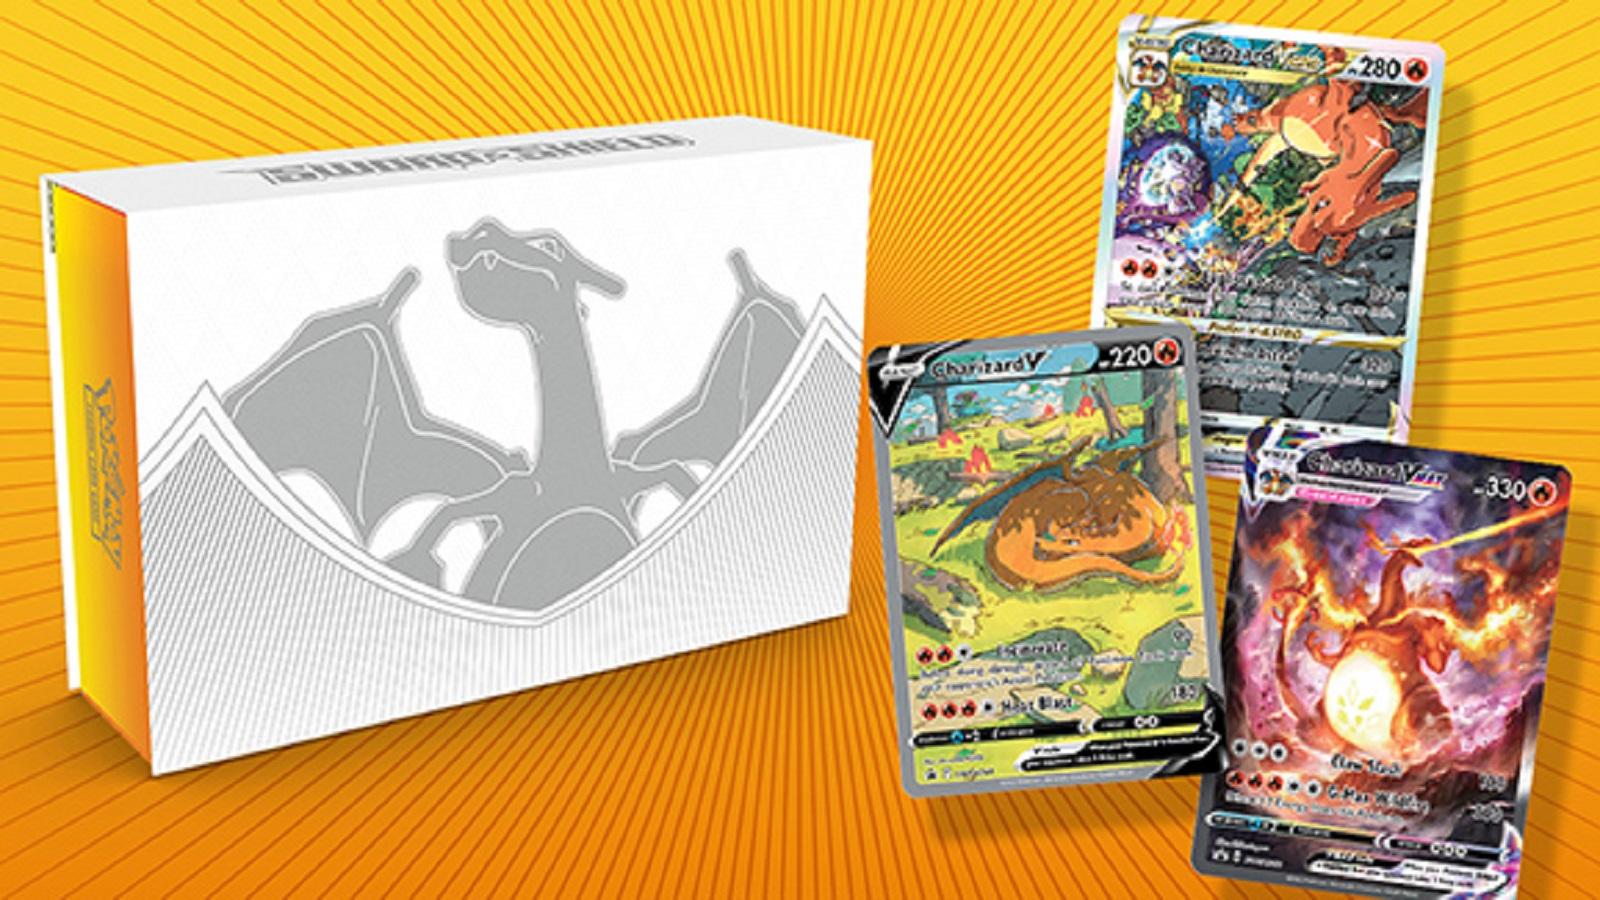 Unboxing: Pokemon Trading Card Game Eevee Evolution Premium Collection 